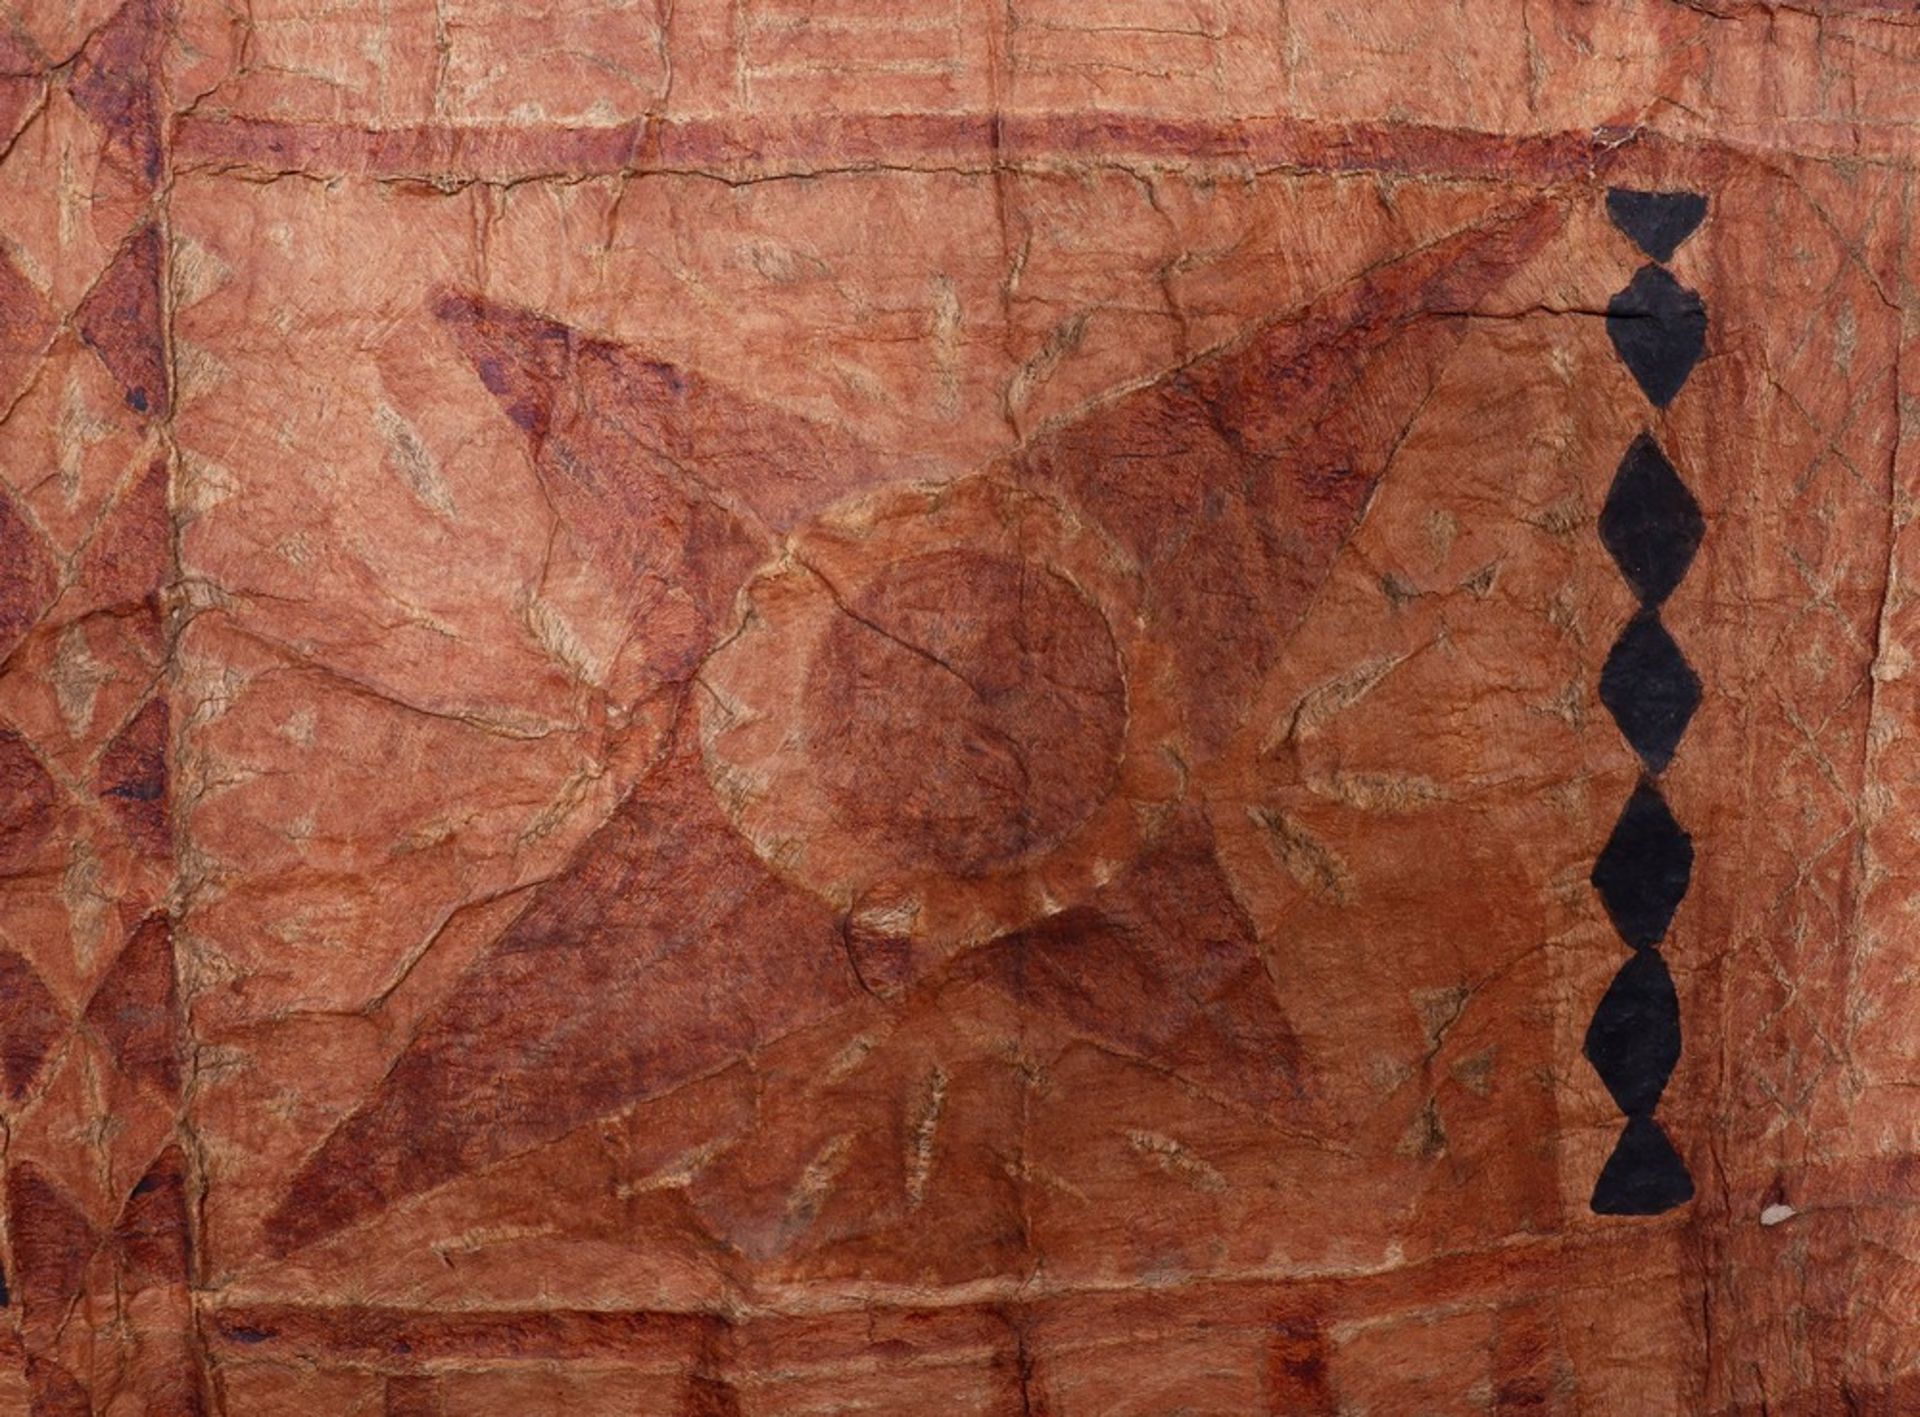 Tapa wall hanging, probably Polynesia, early 20th C. - Image 3 of 4